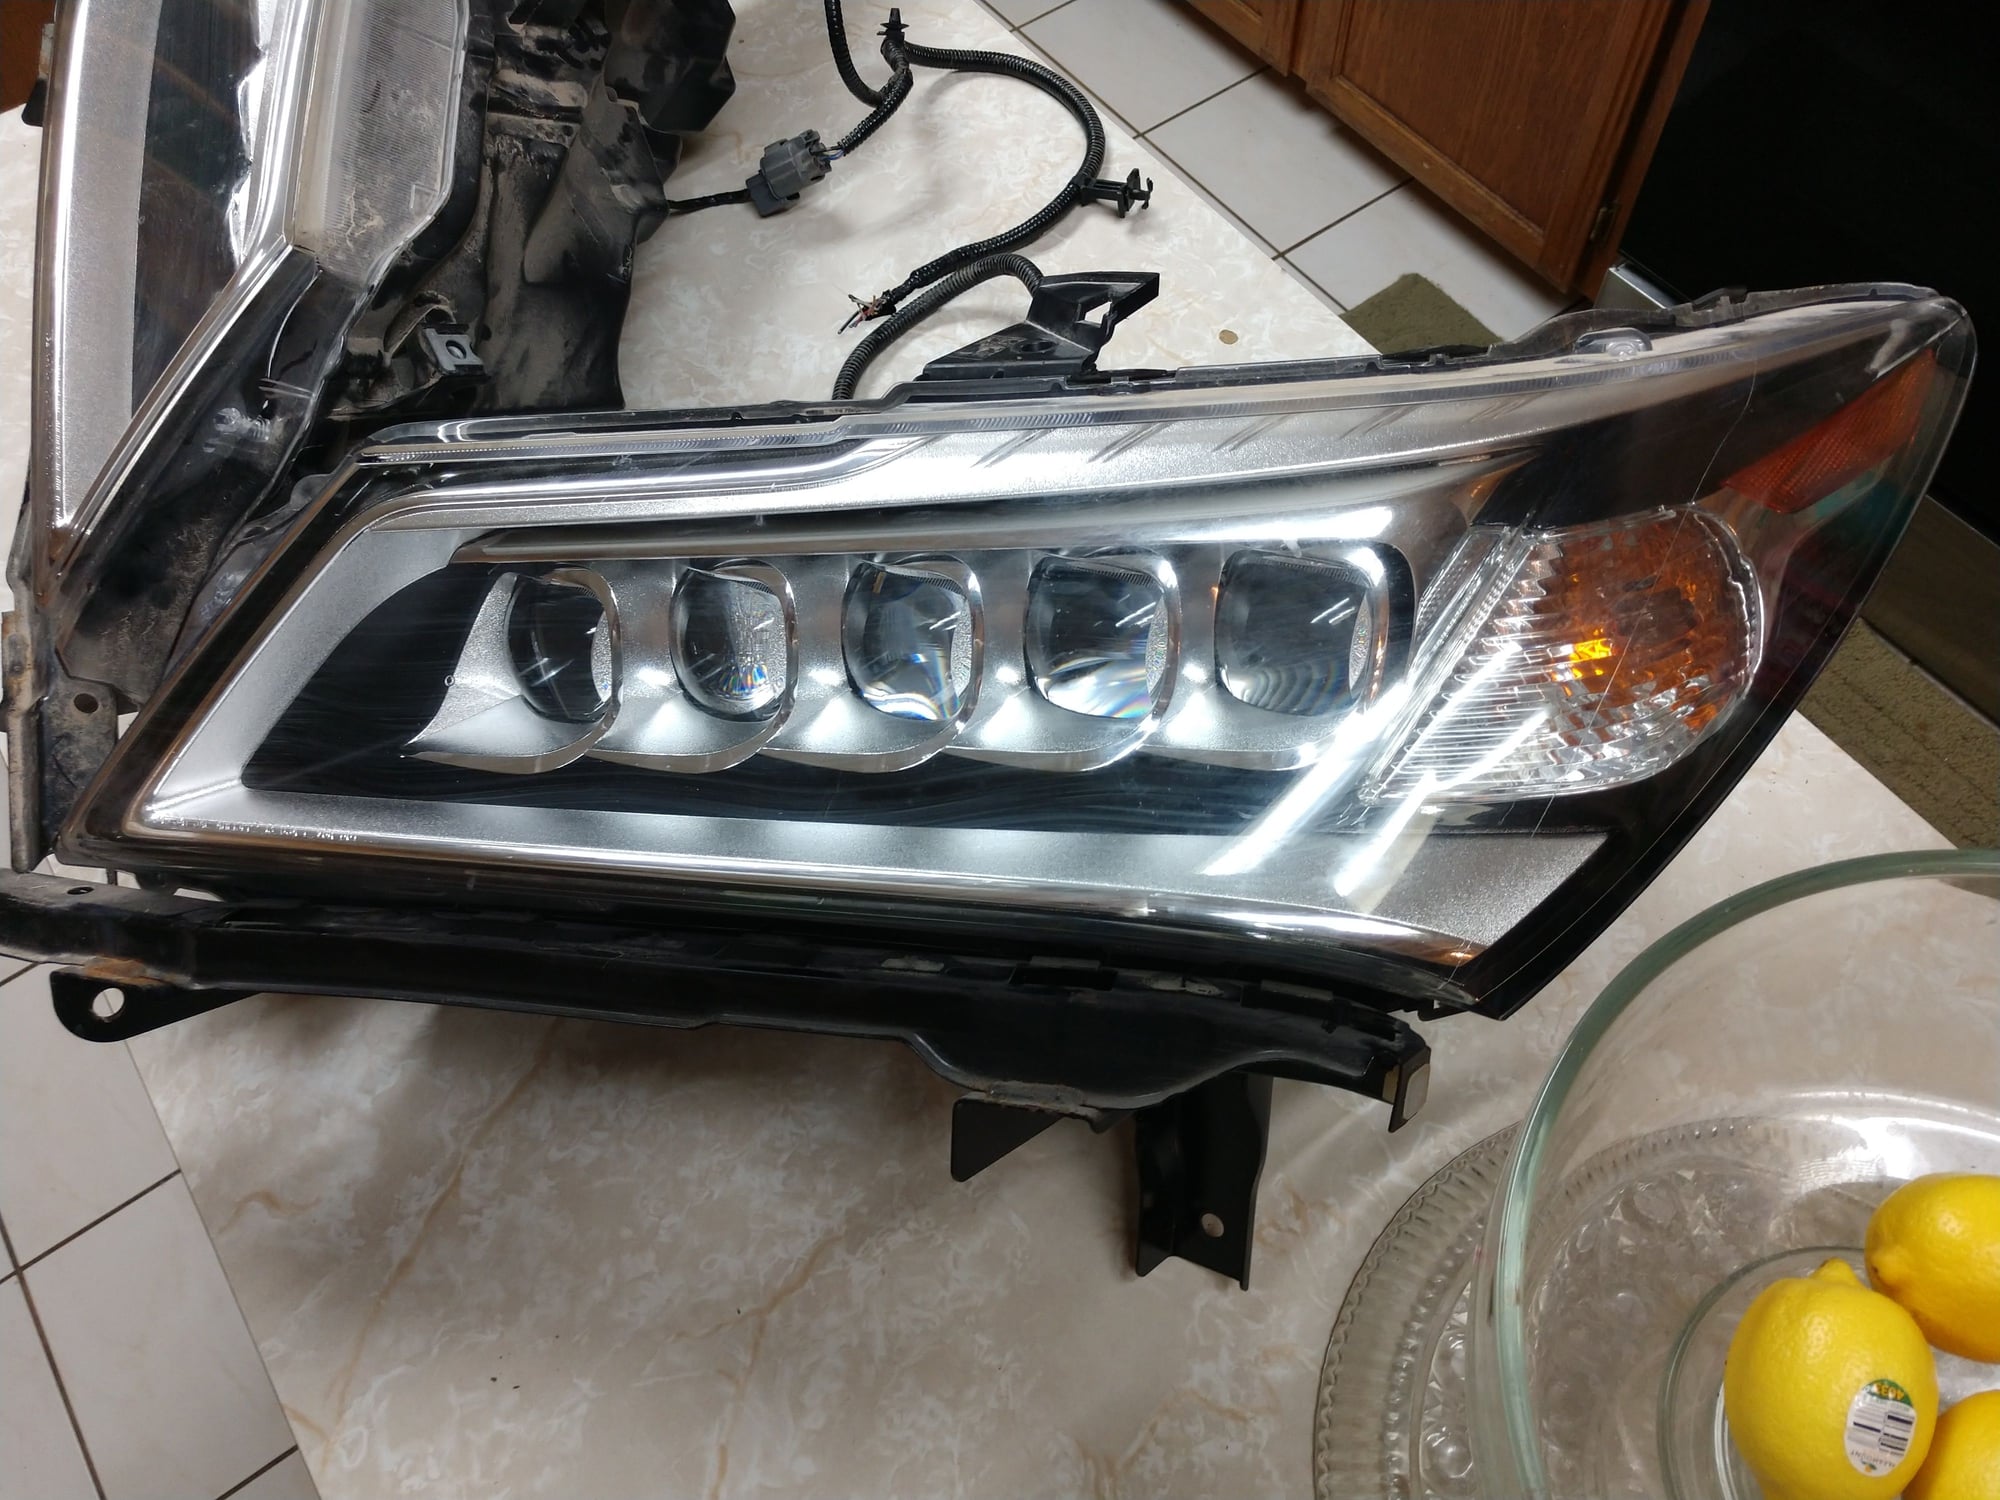 Lights - FS: 14-16 mdx headlights COMPLETE bulbs, ballasts, igniters, brackets, PIGTAILS - Used - 2014 to 2016 Acura MDX - Brownsville, TX 78520, United States